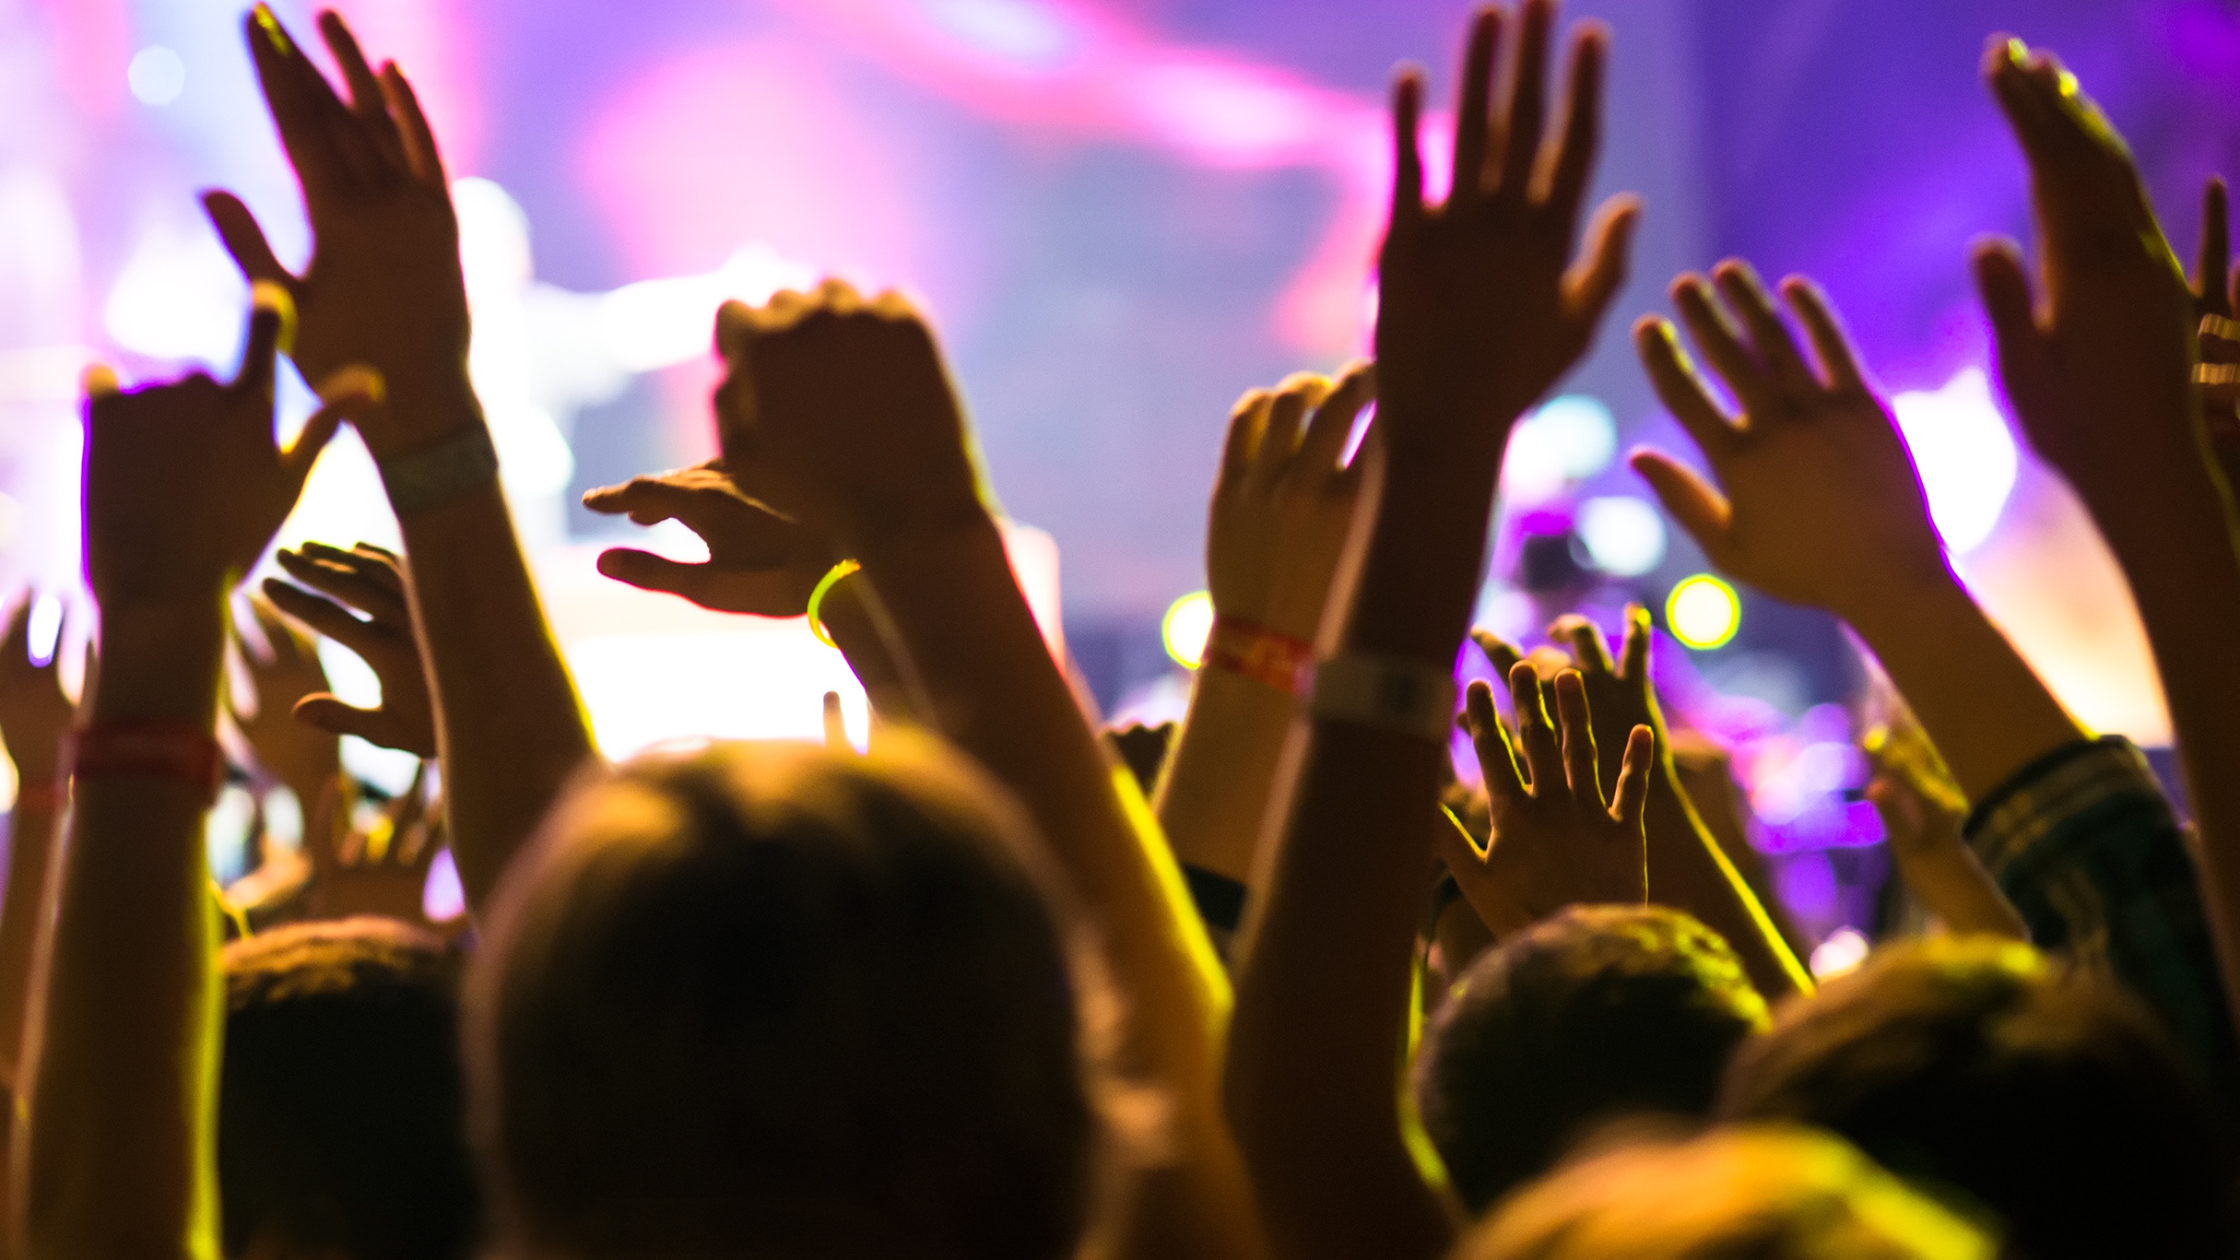 How to Buy Earplugs for Concerts: 5 Questions to Ask Before You Buy